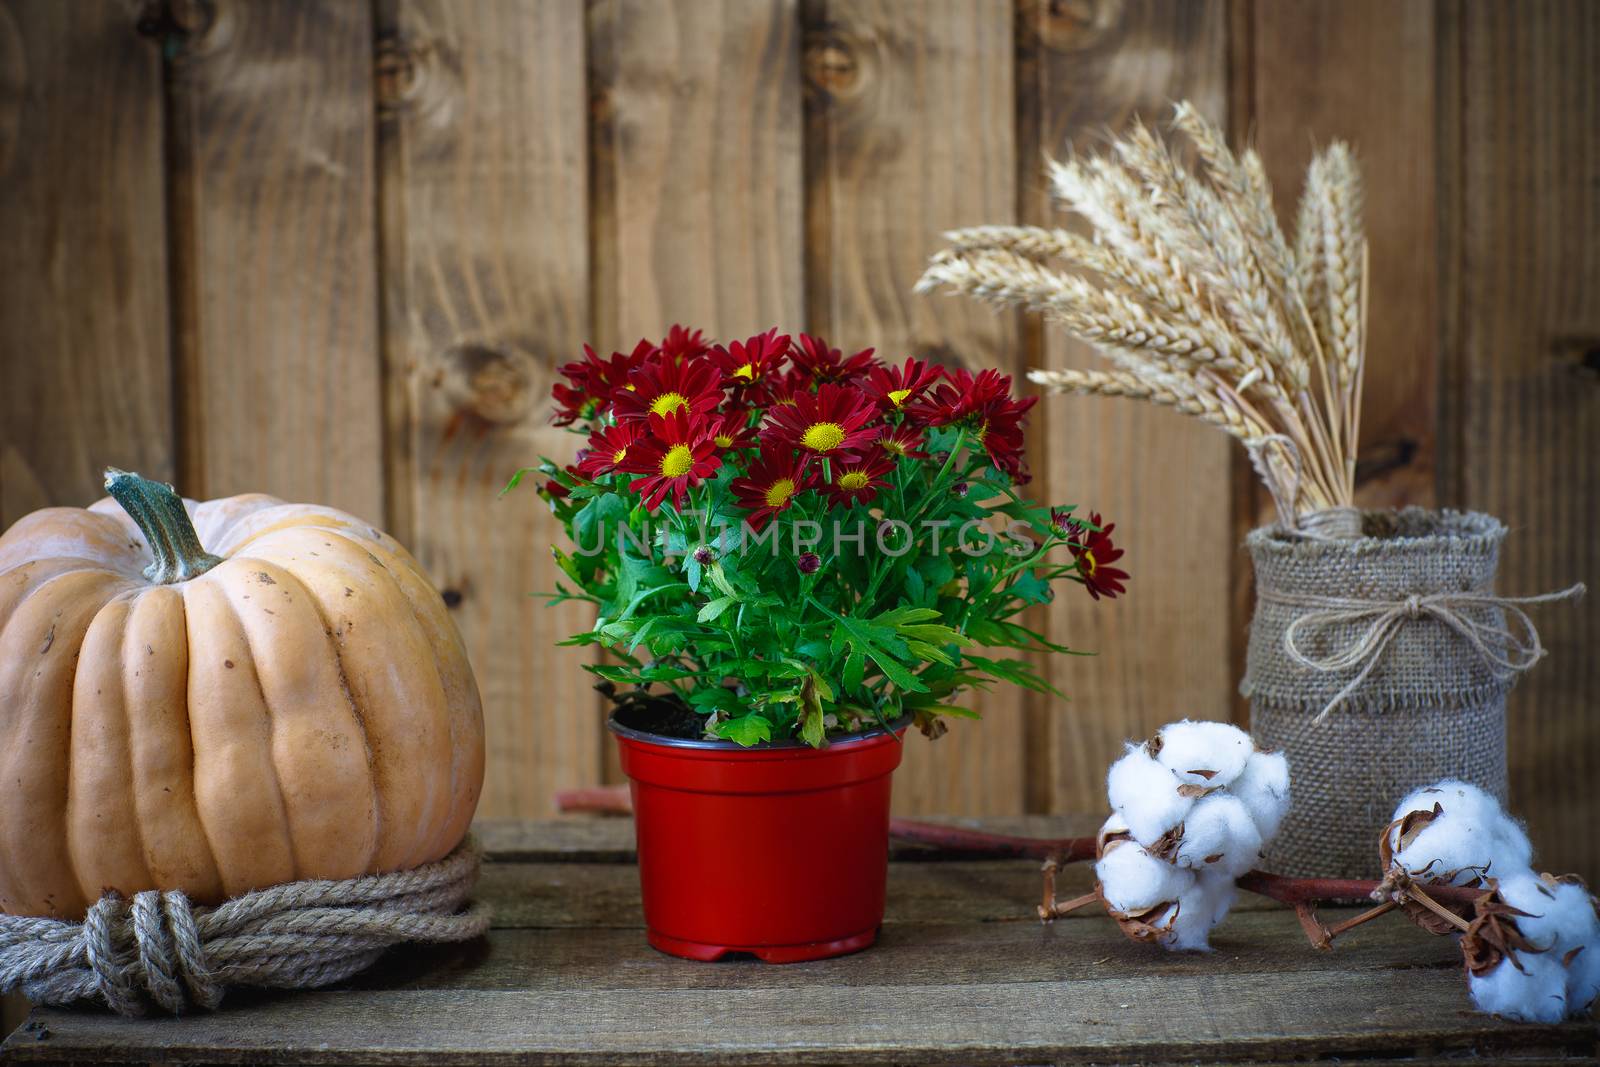 Beautiful flowers on a background of wooden boards